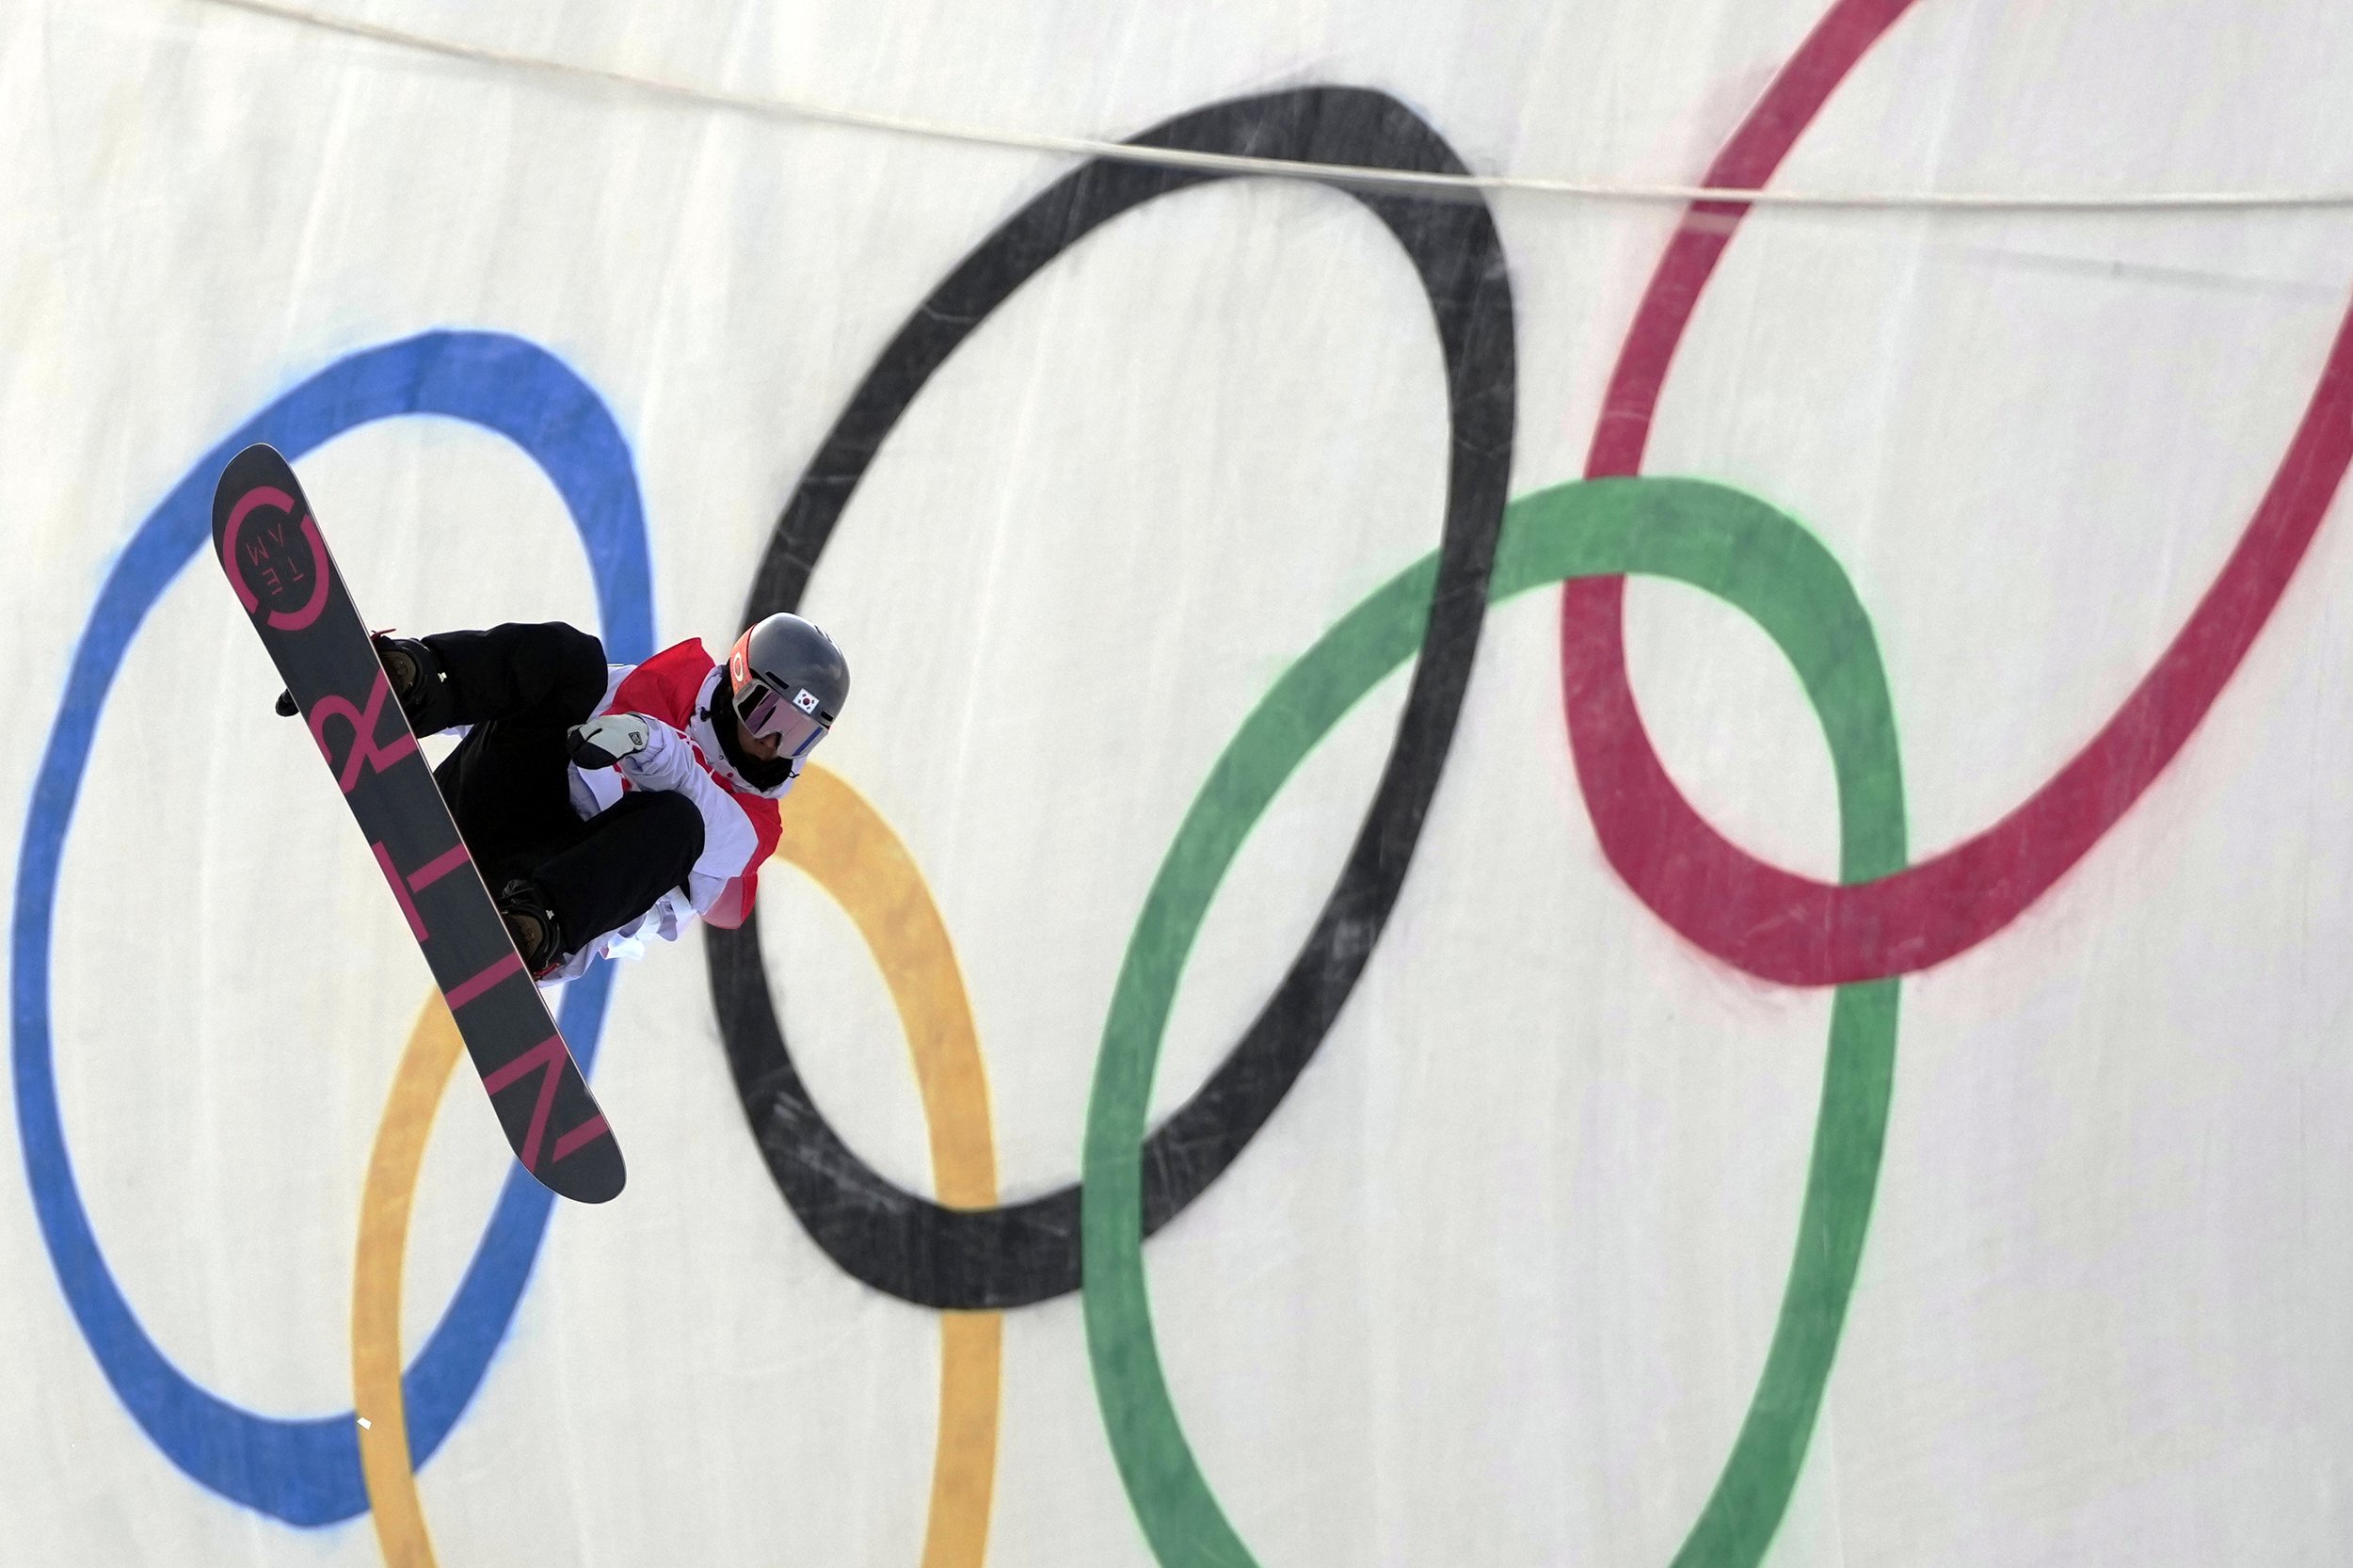  South Korea's Lee Chae-un competes during the men's halfpipe qualification round at the 2022 Winter Olympics, Wednesday, Feb. 9, 2022, in Zhangjiakou, China. (AP Photo/Lee Jin-man) 